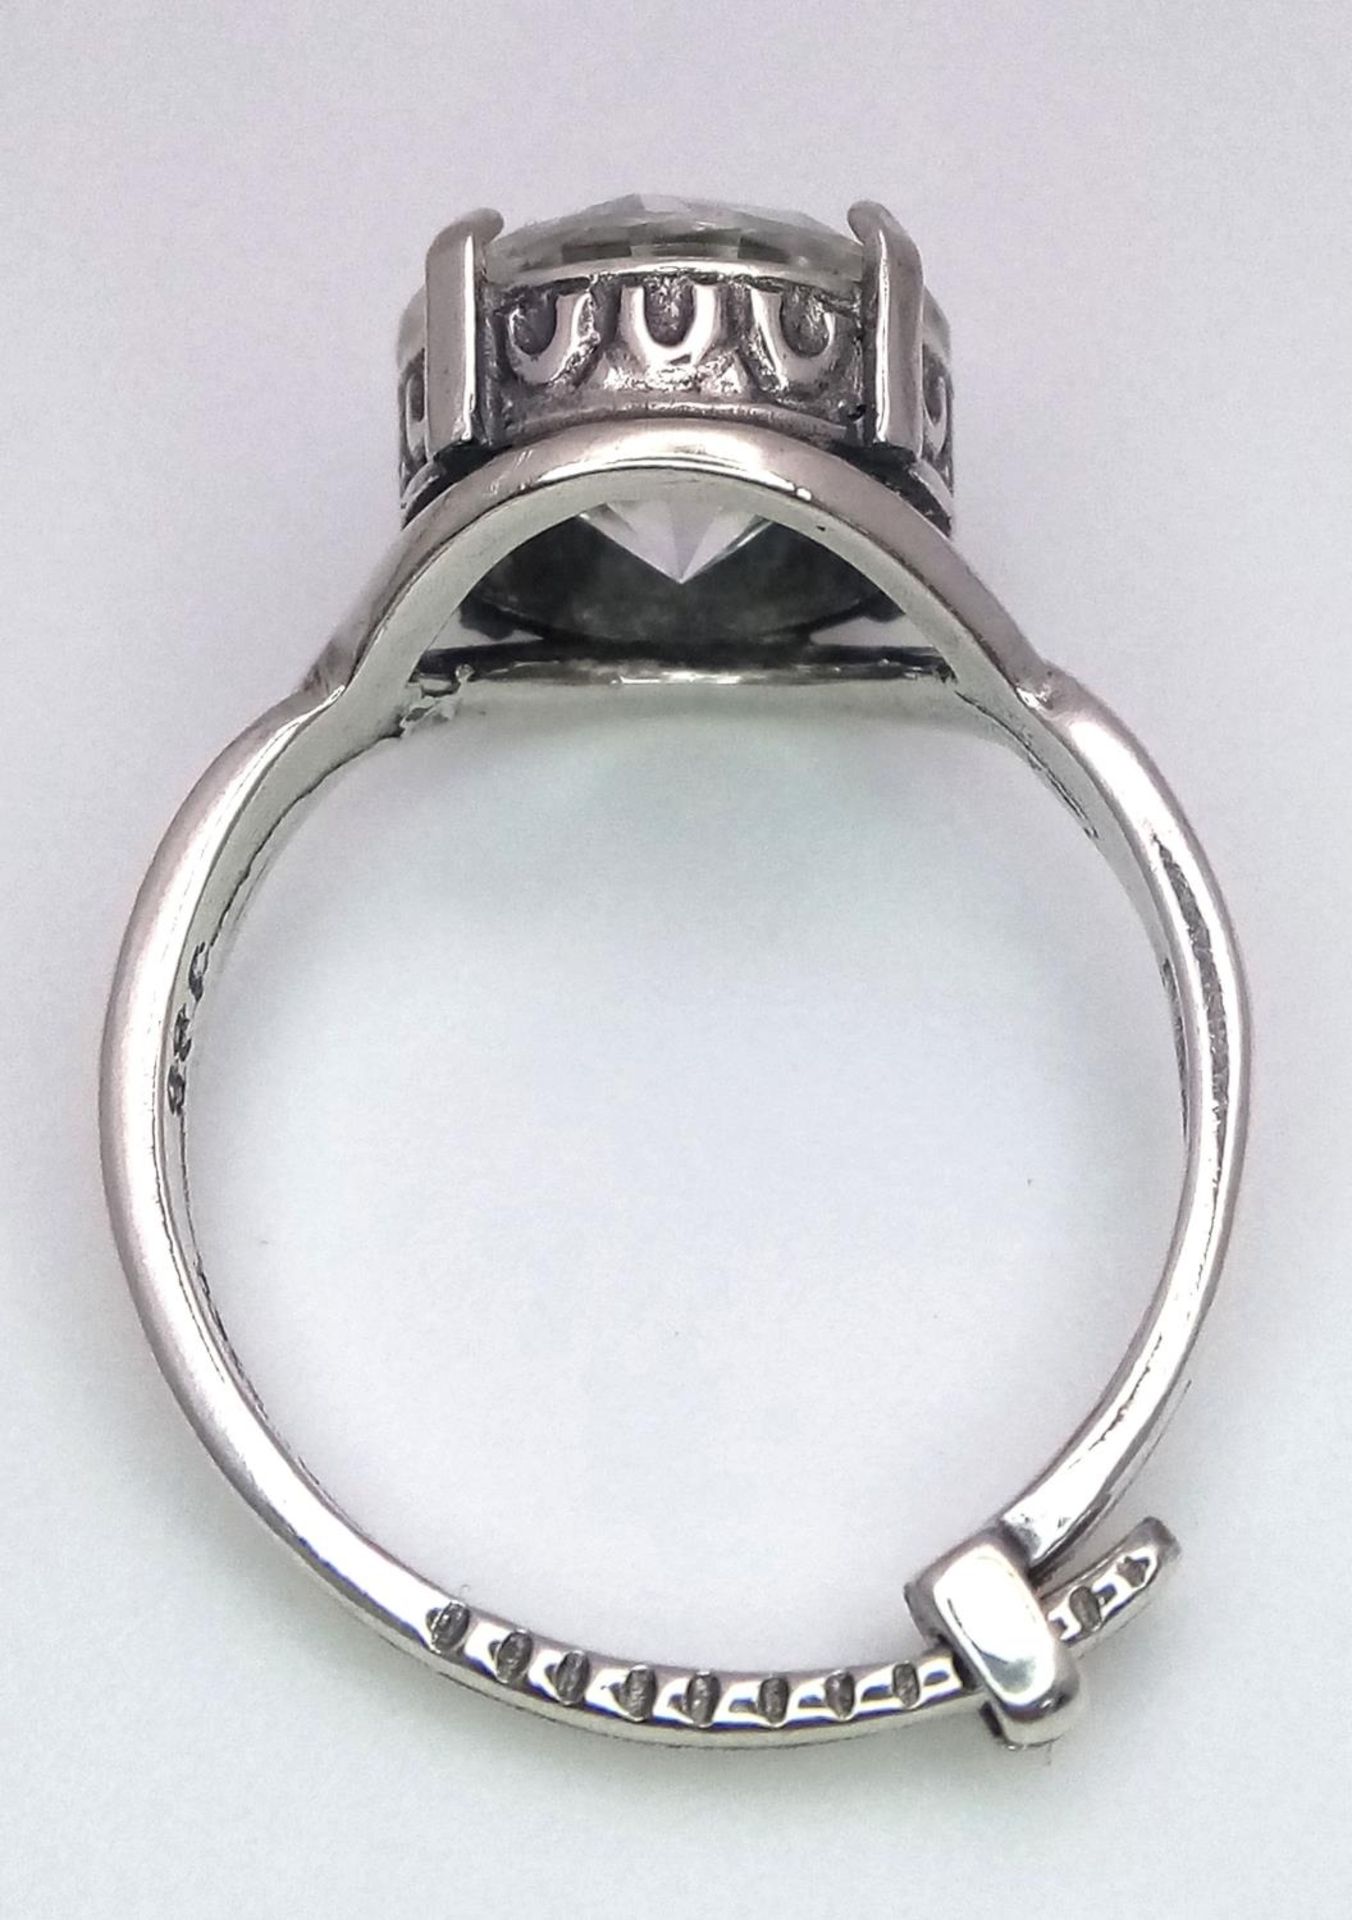 A 4ct Moissanite, 925 Silver Ring. Size T. Comes with a GRA certificate. - Image 4 of 6